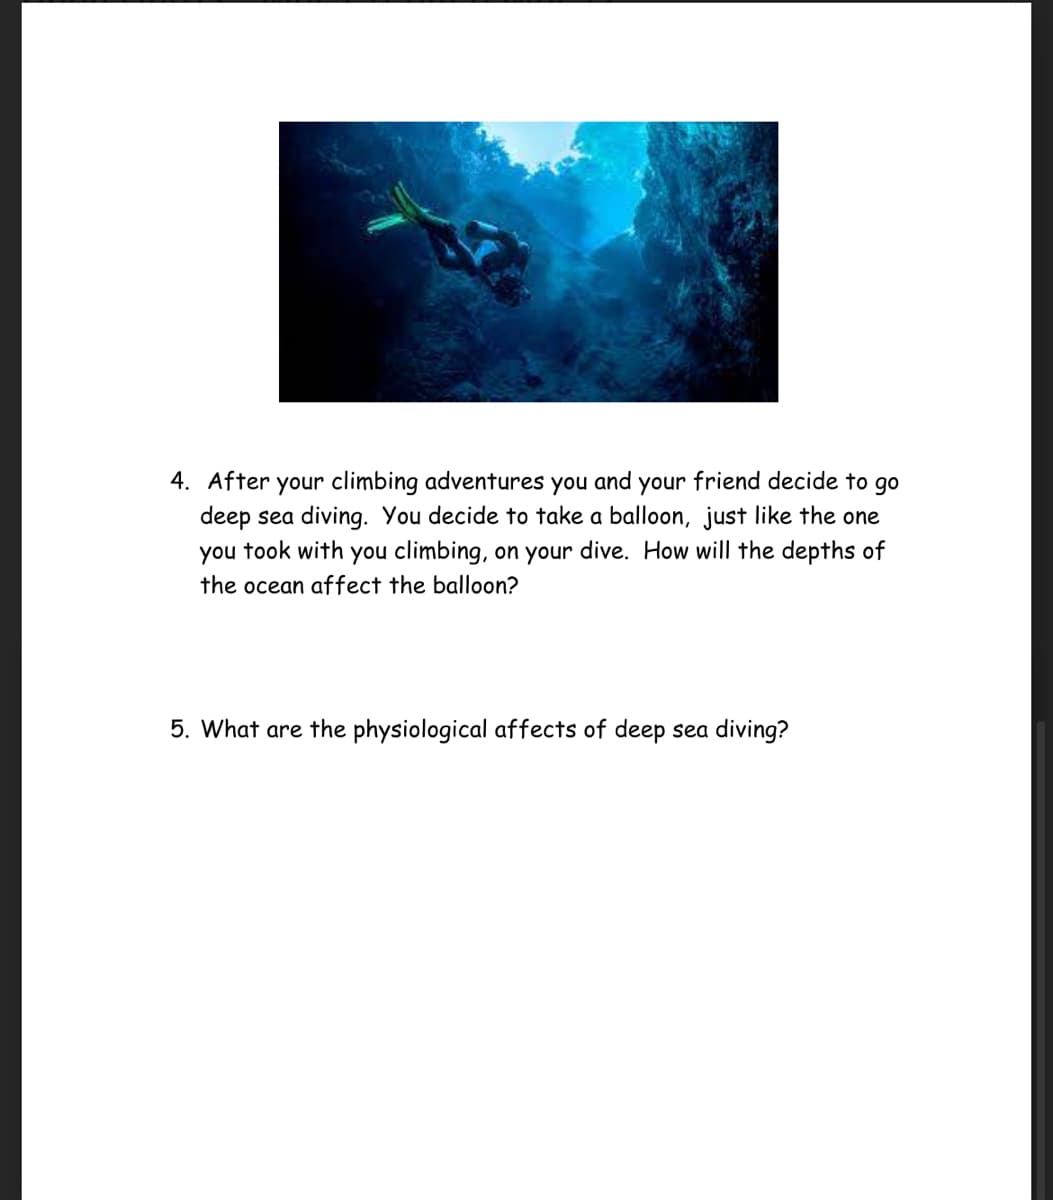 4. After your climbing adventures you and your friend decide to go
deep sea diving. You decide to take a balloon, just like the one
you took with you climbing, on your dive. How will the depths of
the ocean affect the balloon?
5. What are the physiological affects of deep sea diving?
